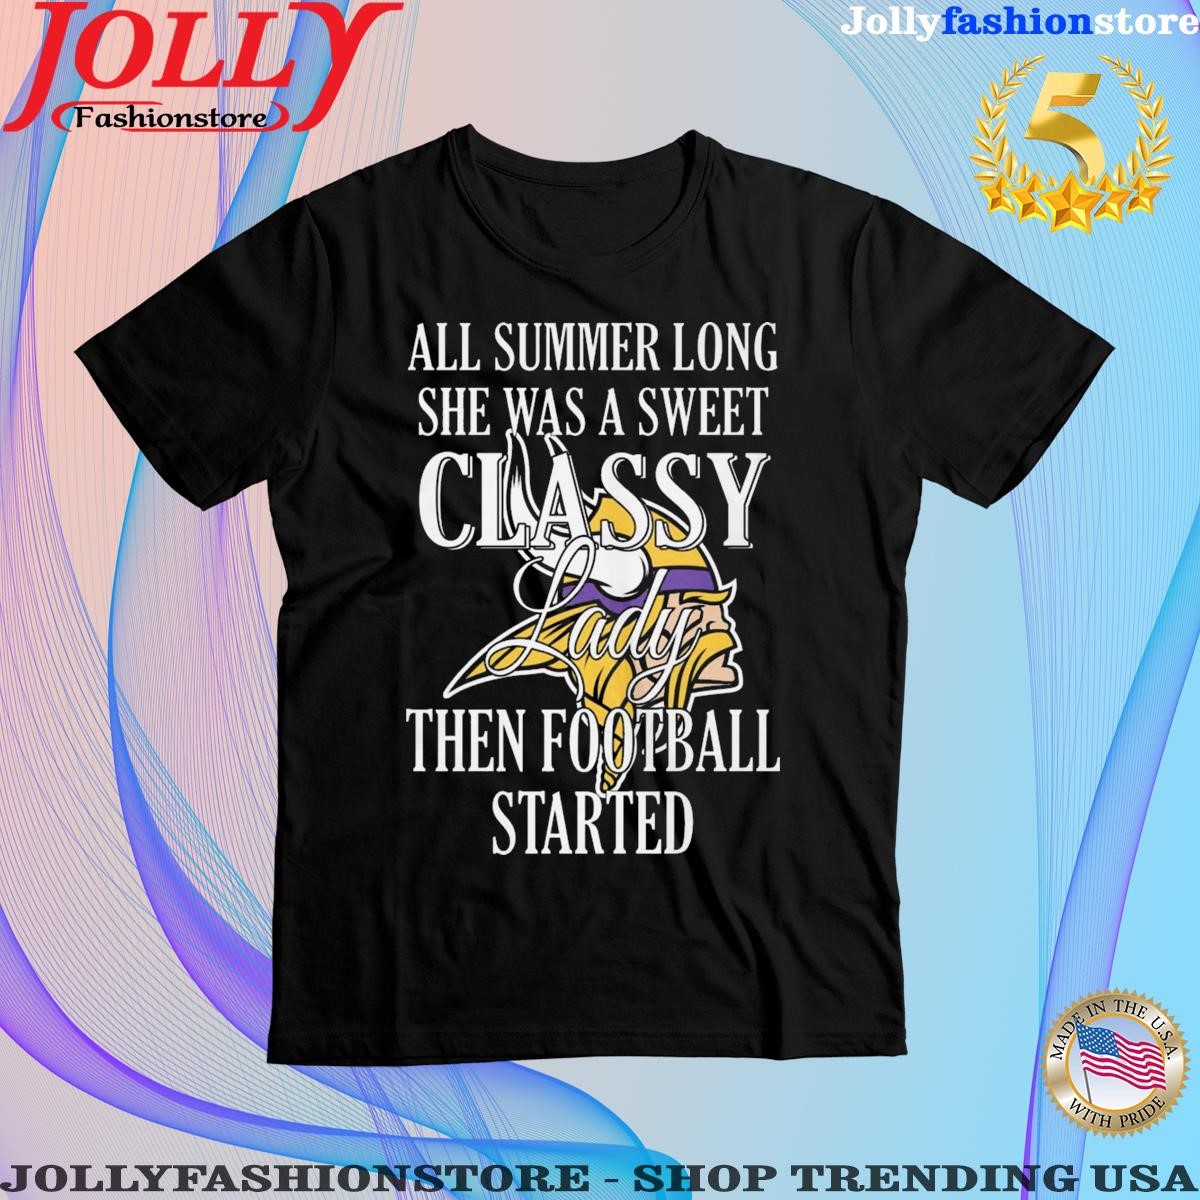 Minnesota vikings all summer long she was a sweet classy lady when Football started shirt